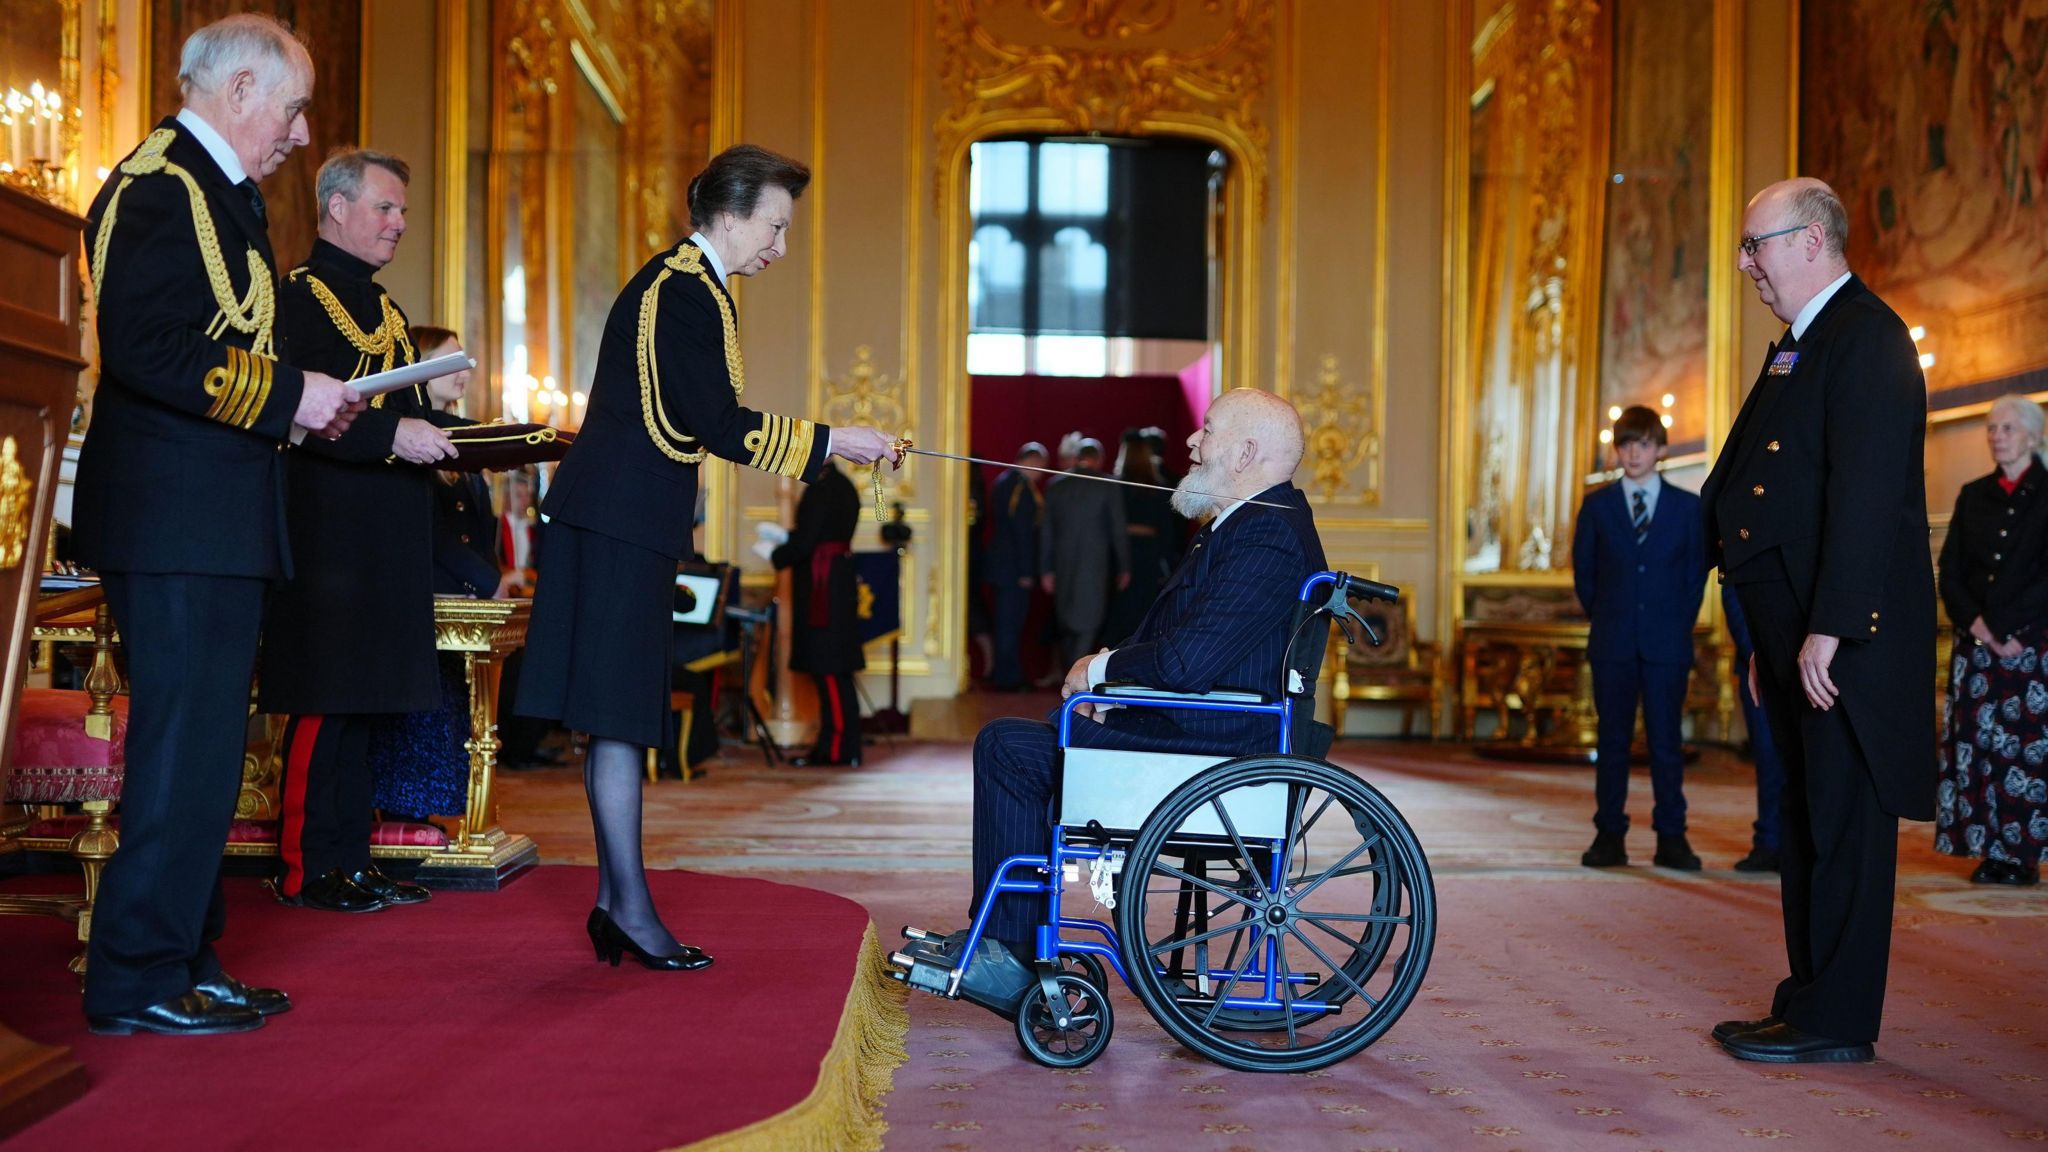 Sir Michael was knighted in a ceremony with the Princess Royal